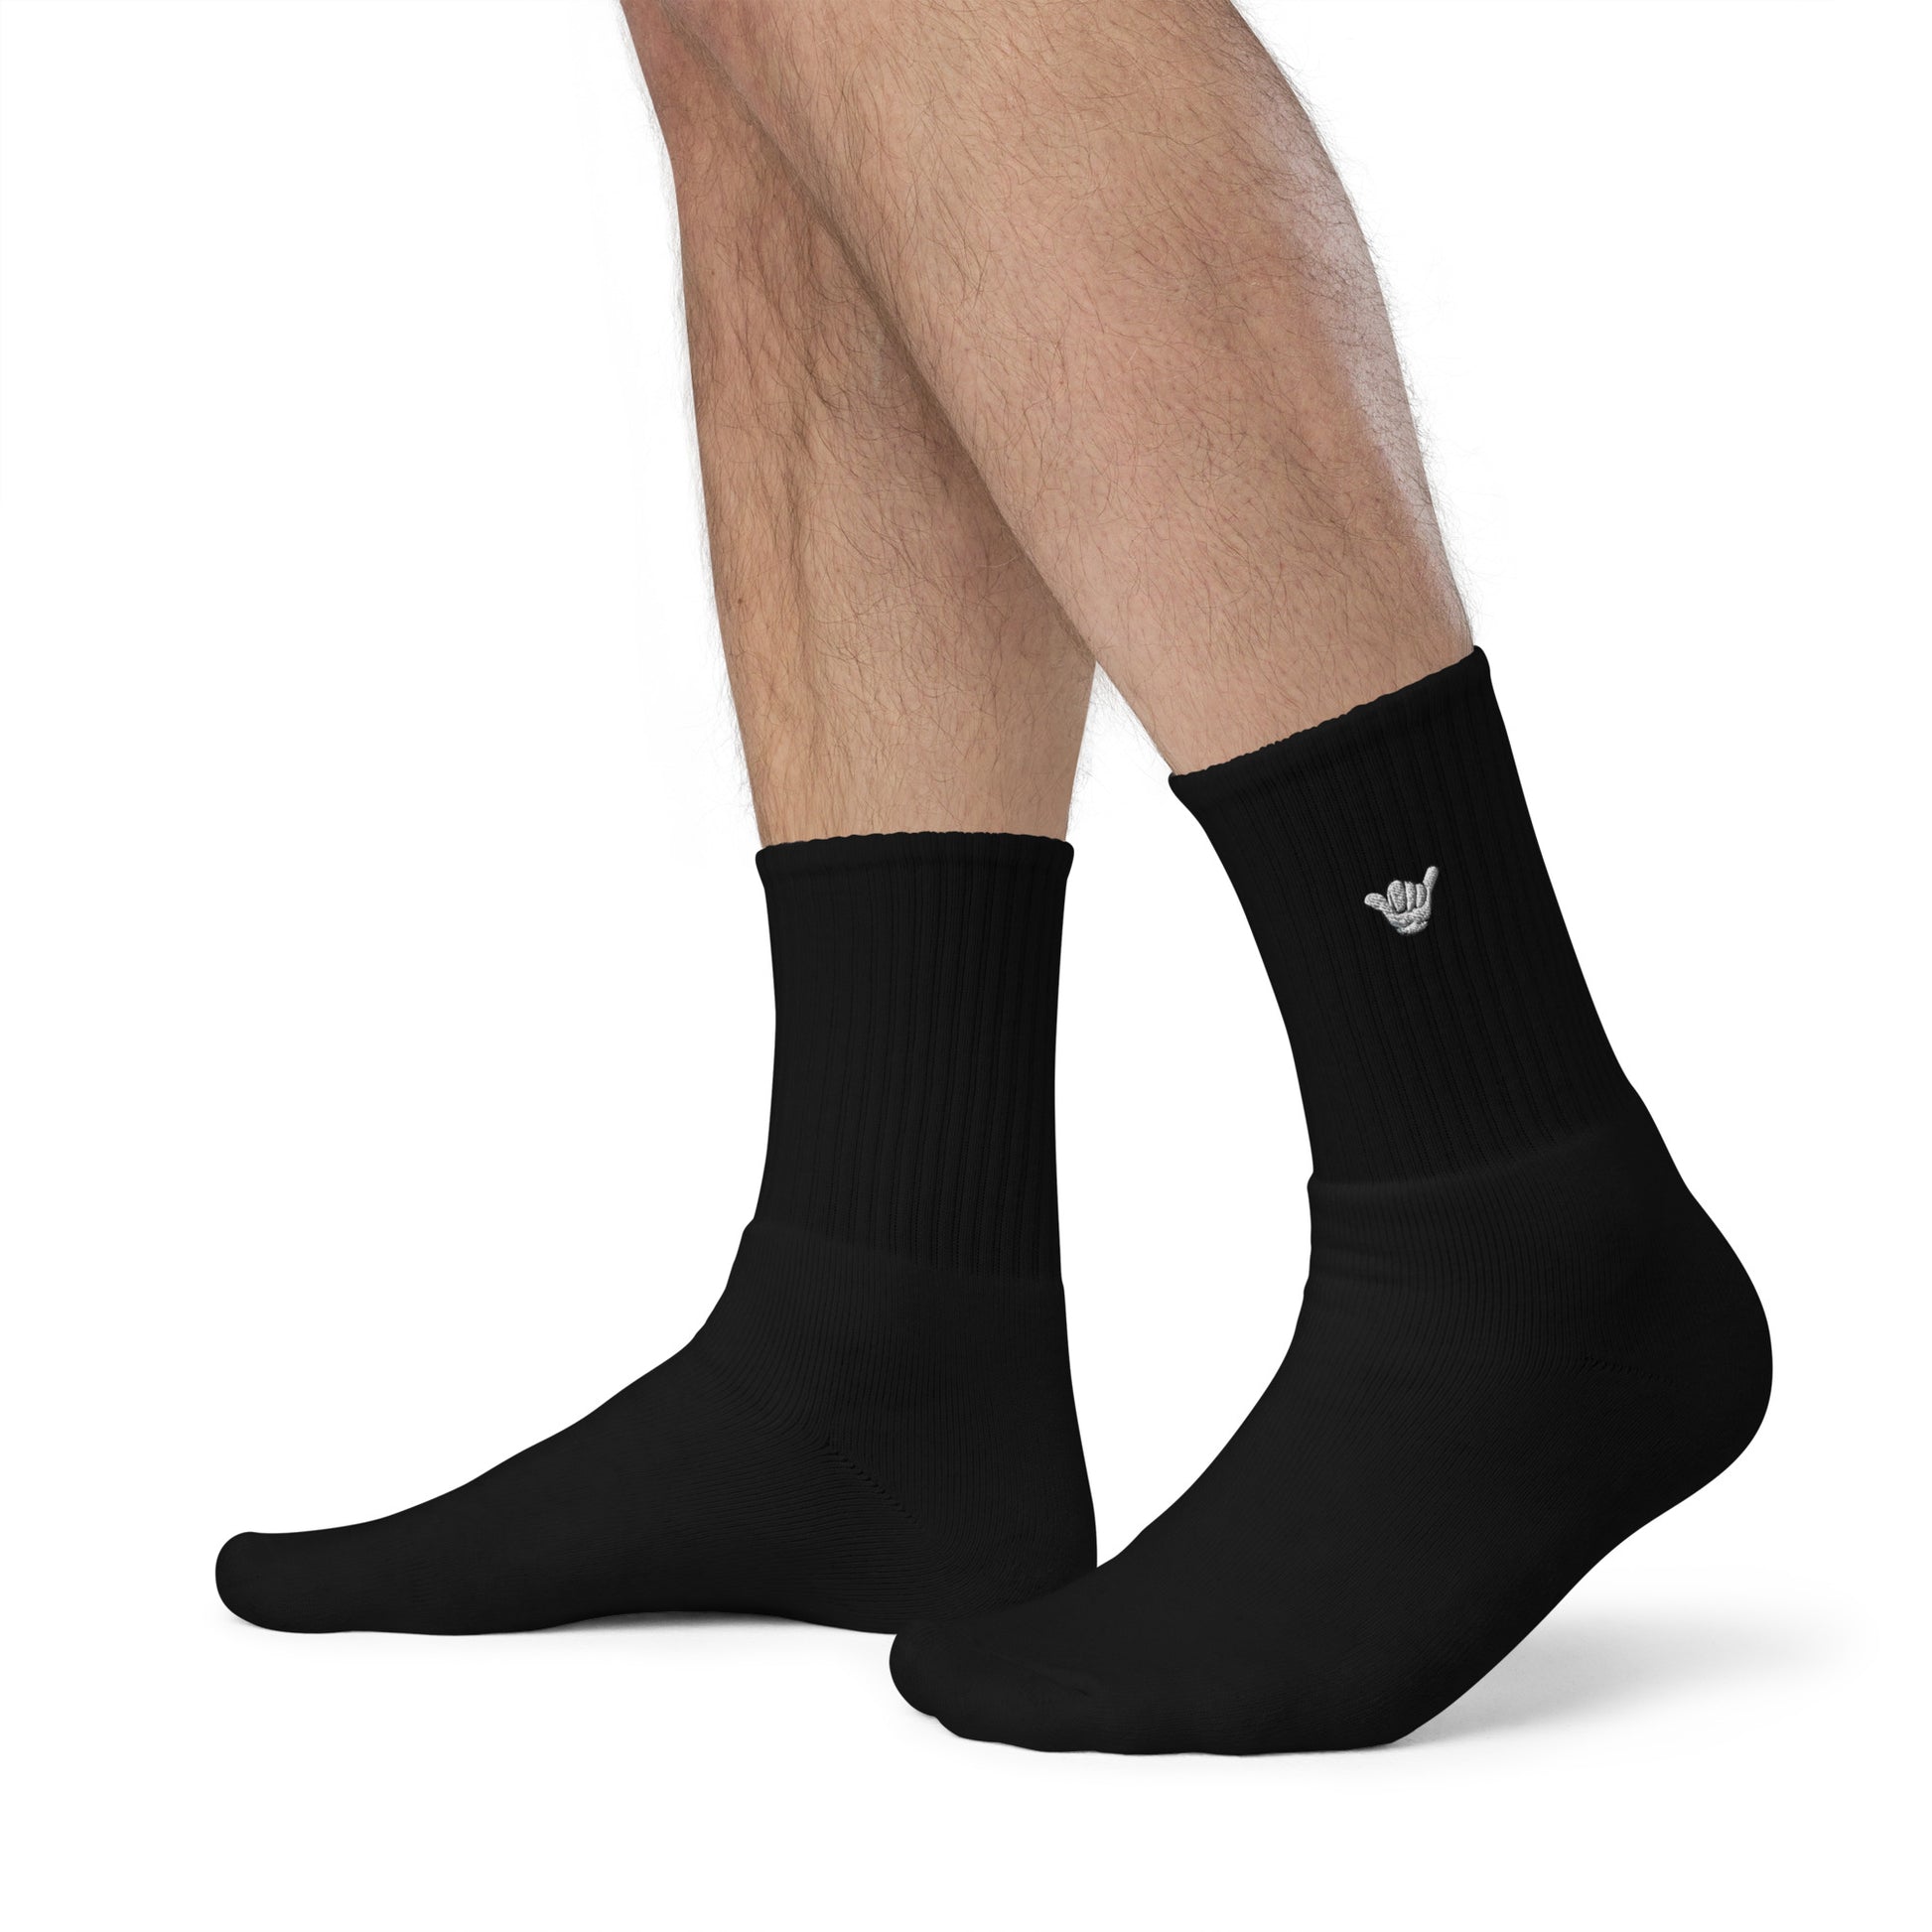  socks-from-the-side-with-cartoon-symbol